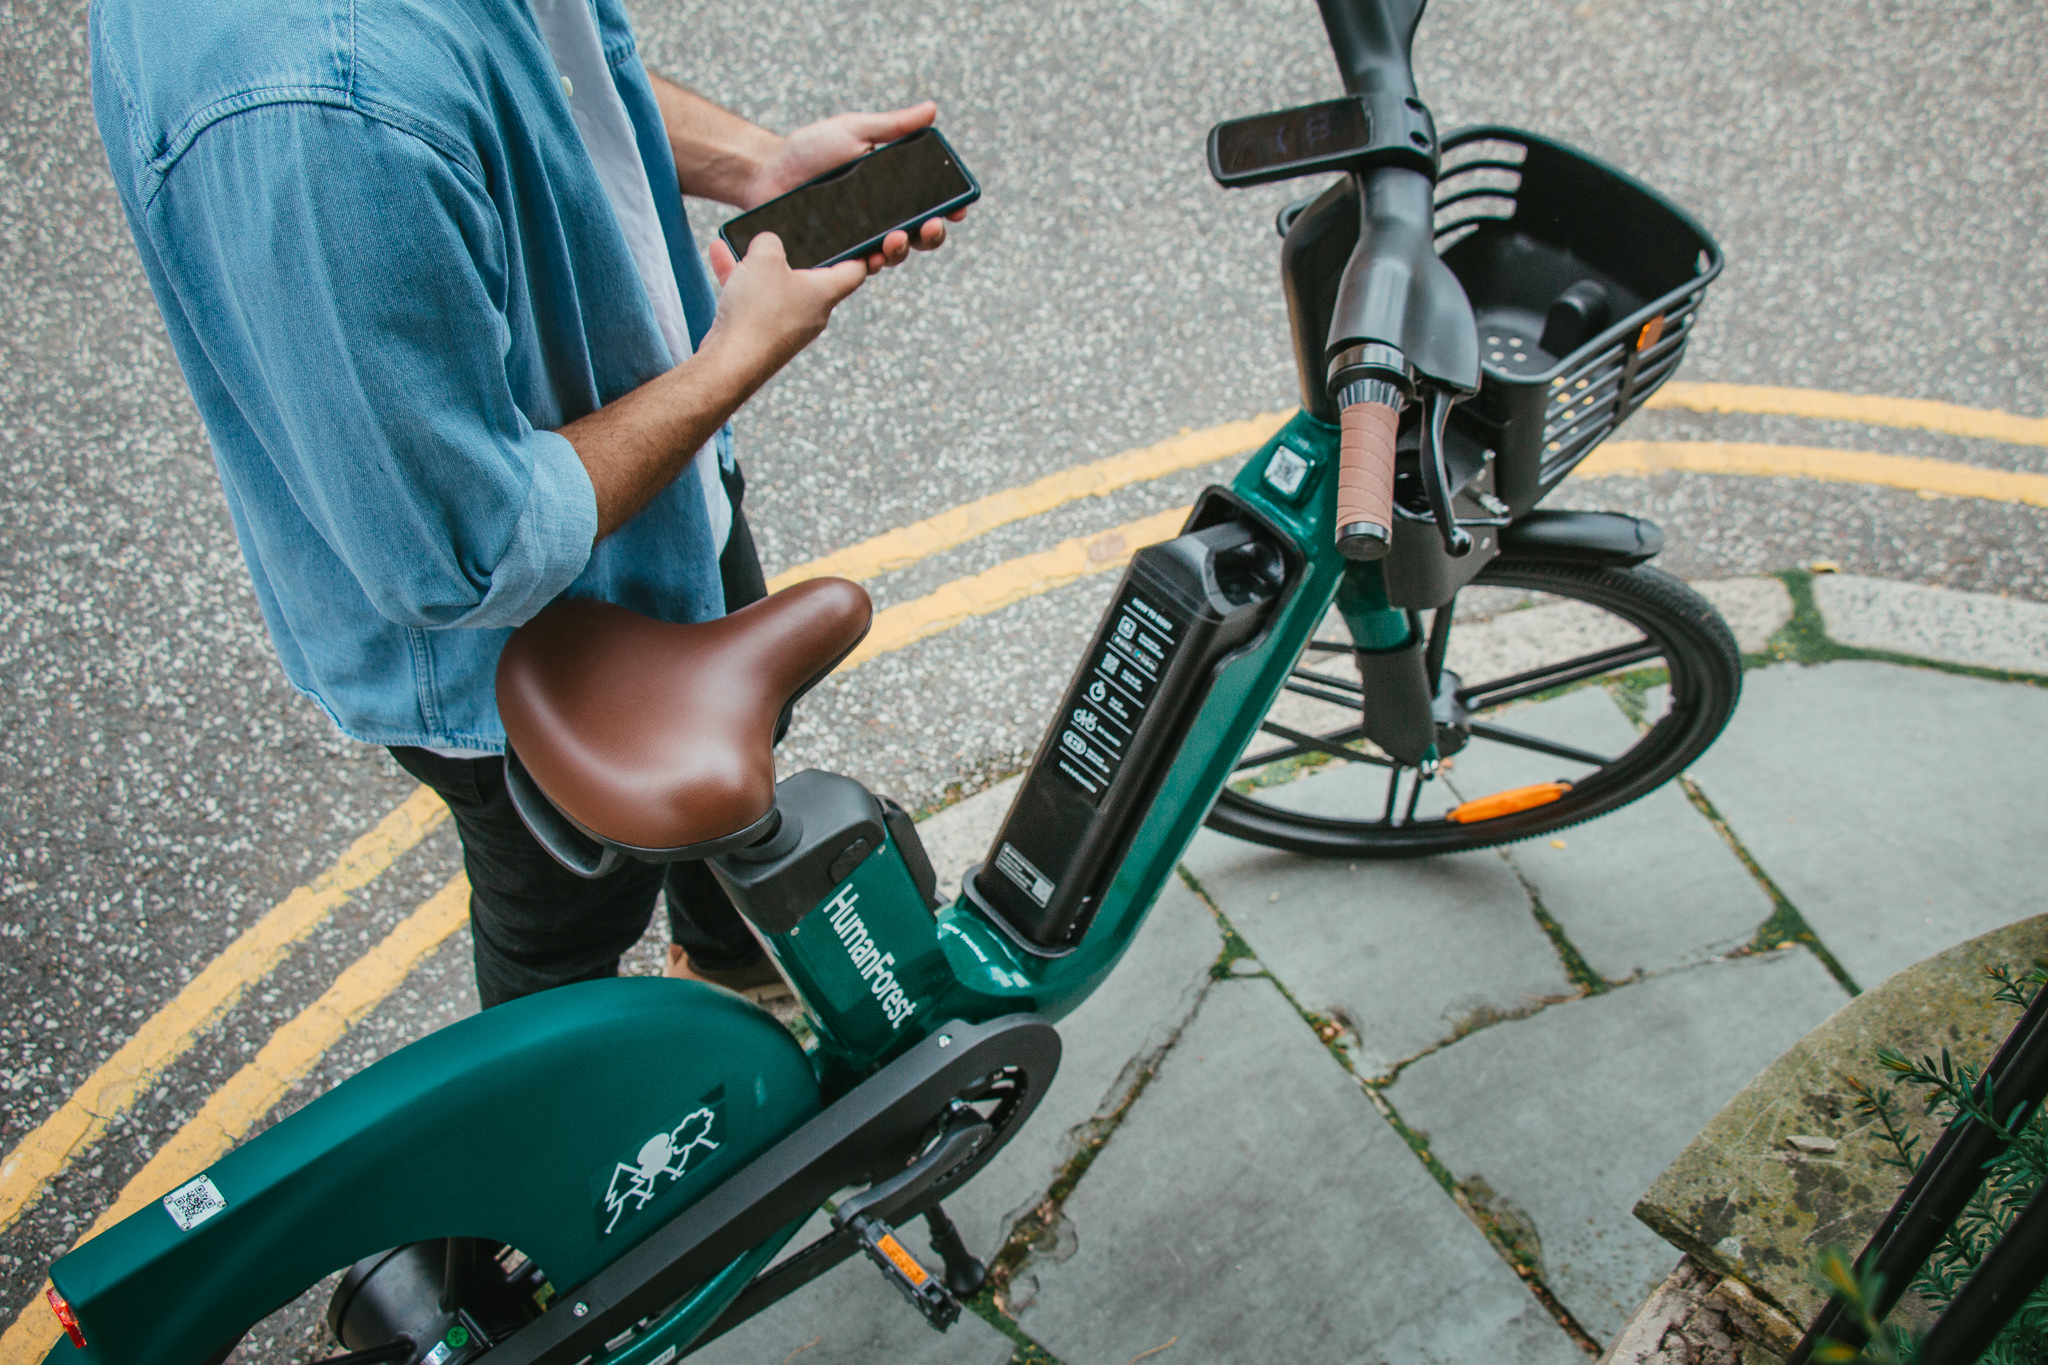 HumanForest partners with food delivery firm Deliveroo